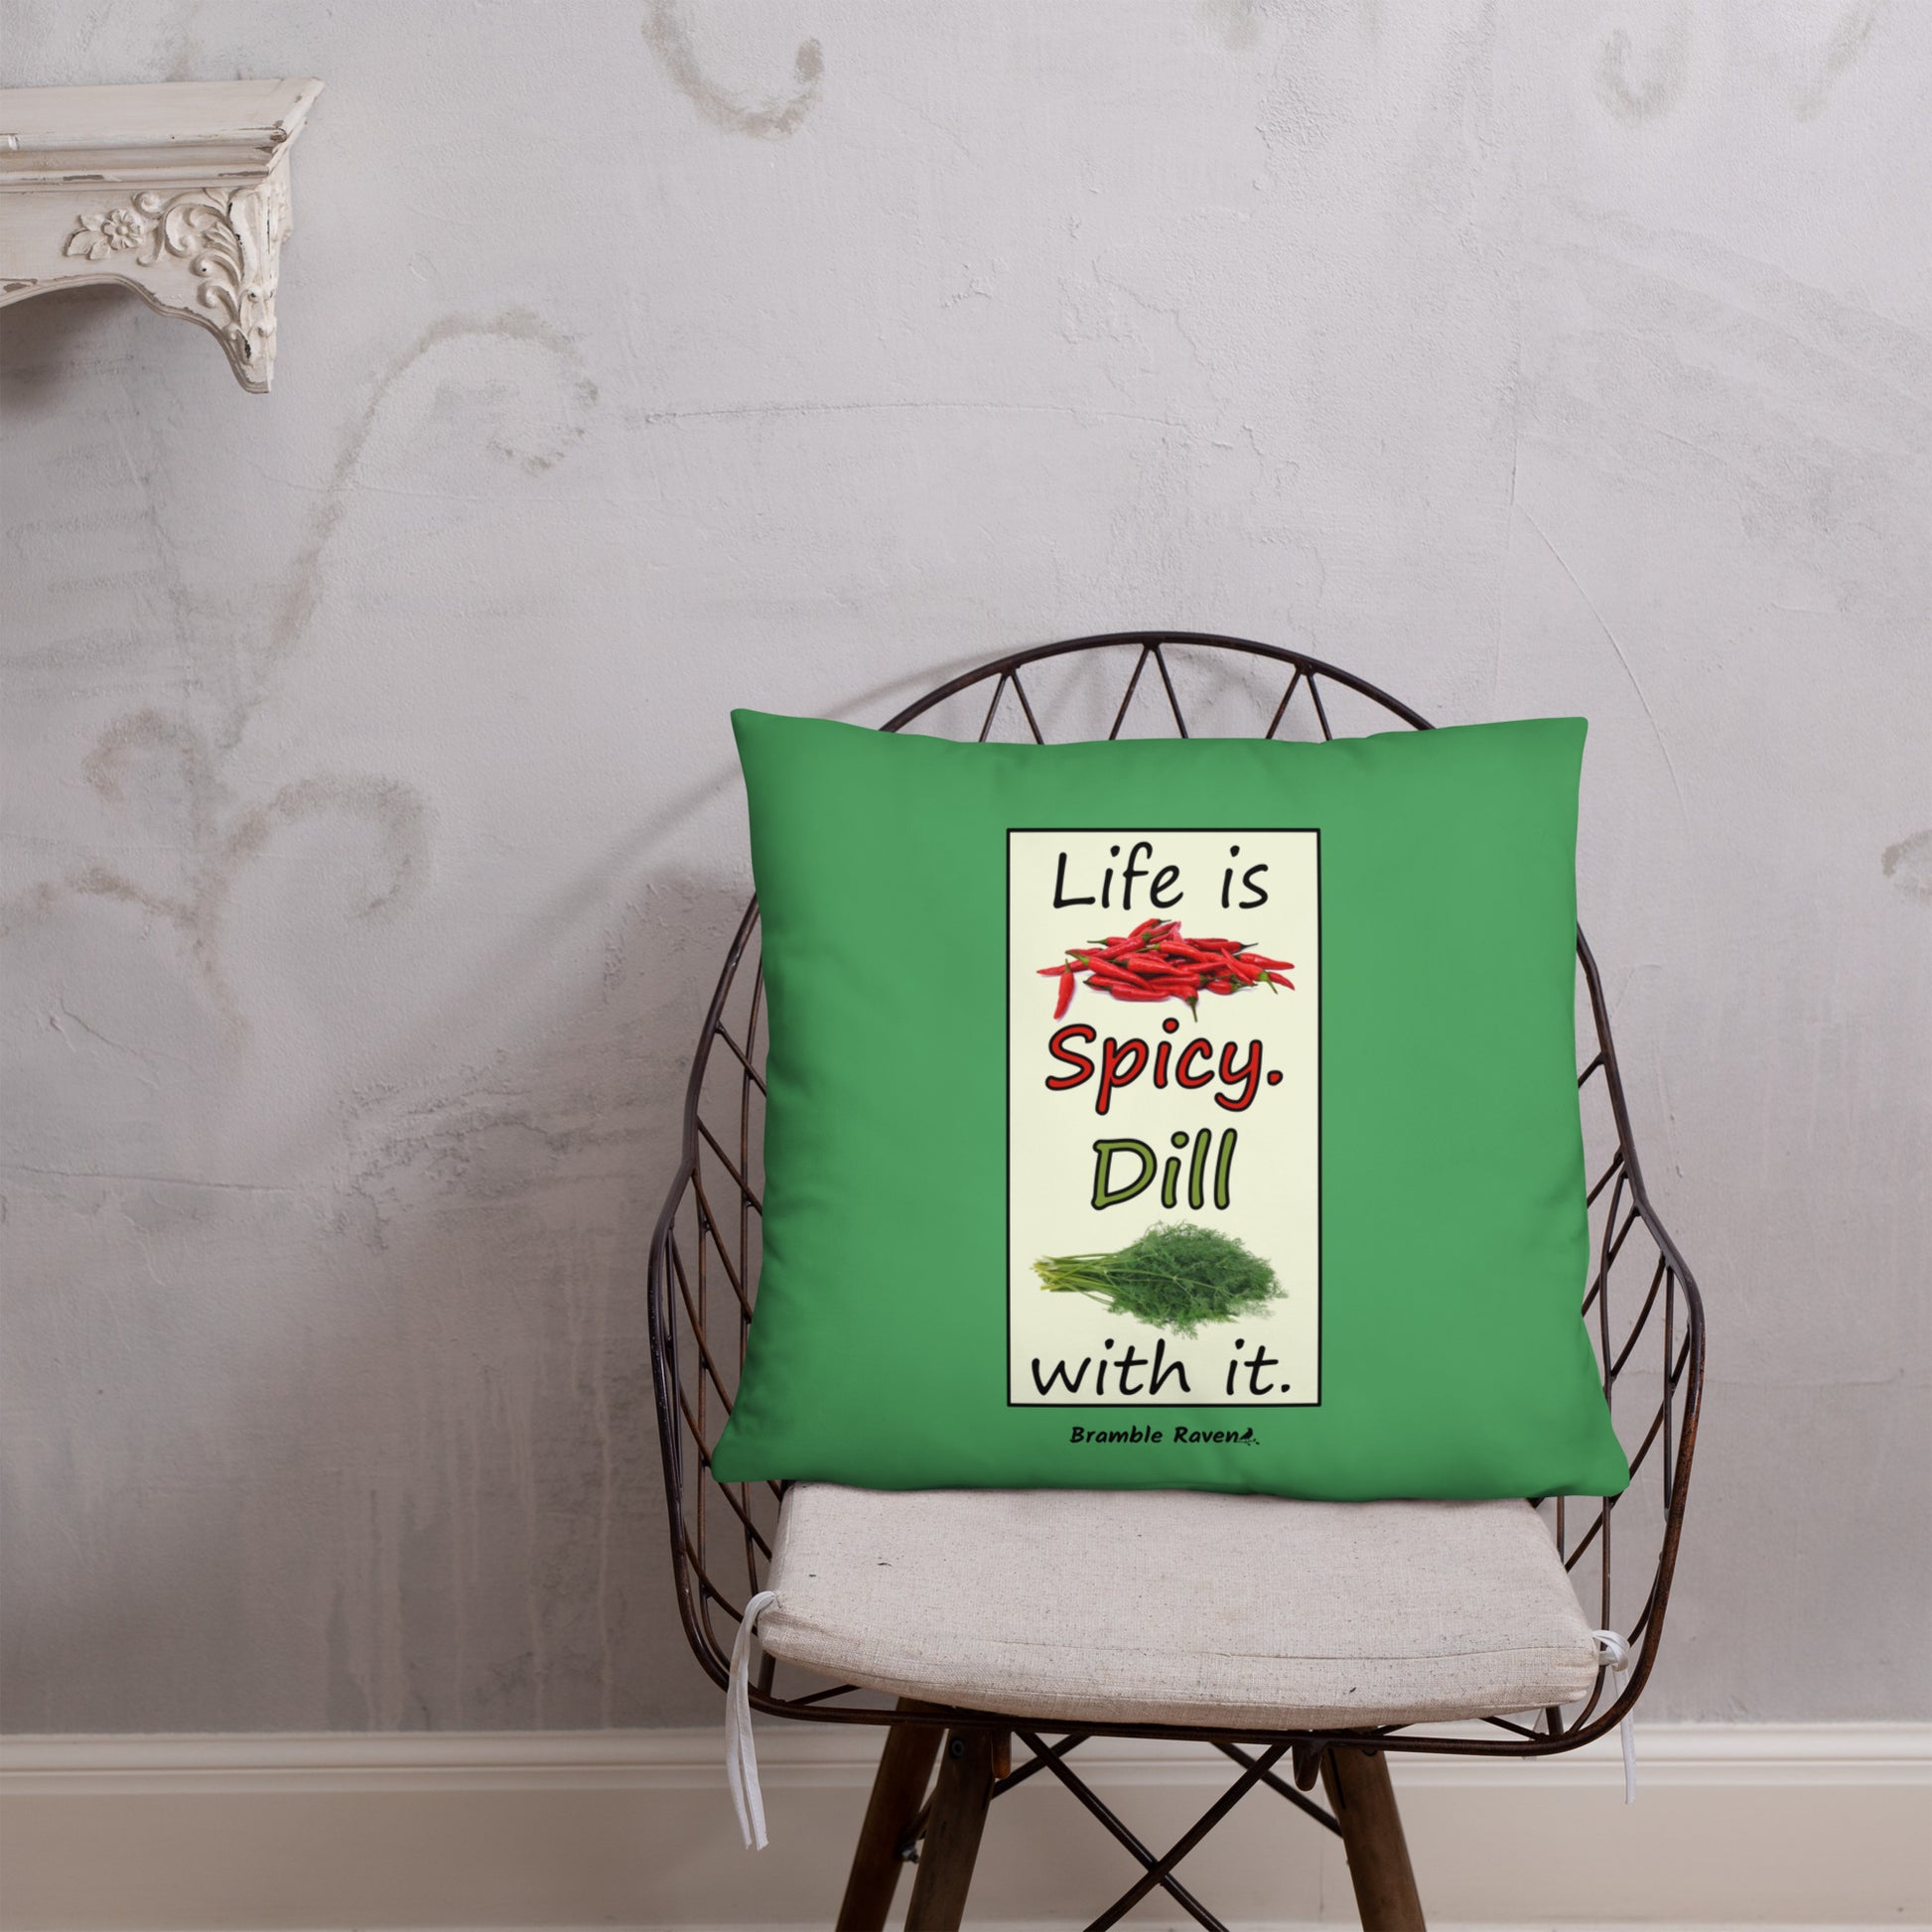 Life is spicy. Dill with it. Phrase with images of chili peppers and dill weed. Rectangular frame for saying on green background. 22 by 22 inch accent pillow. Double sided image. Shown on a wicker chair.